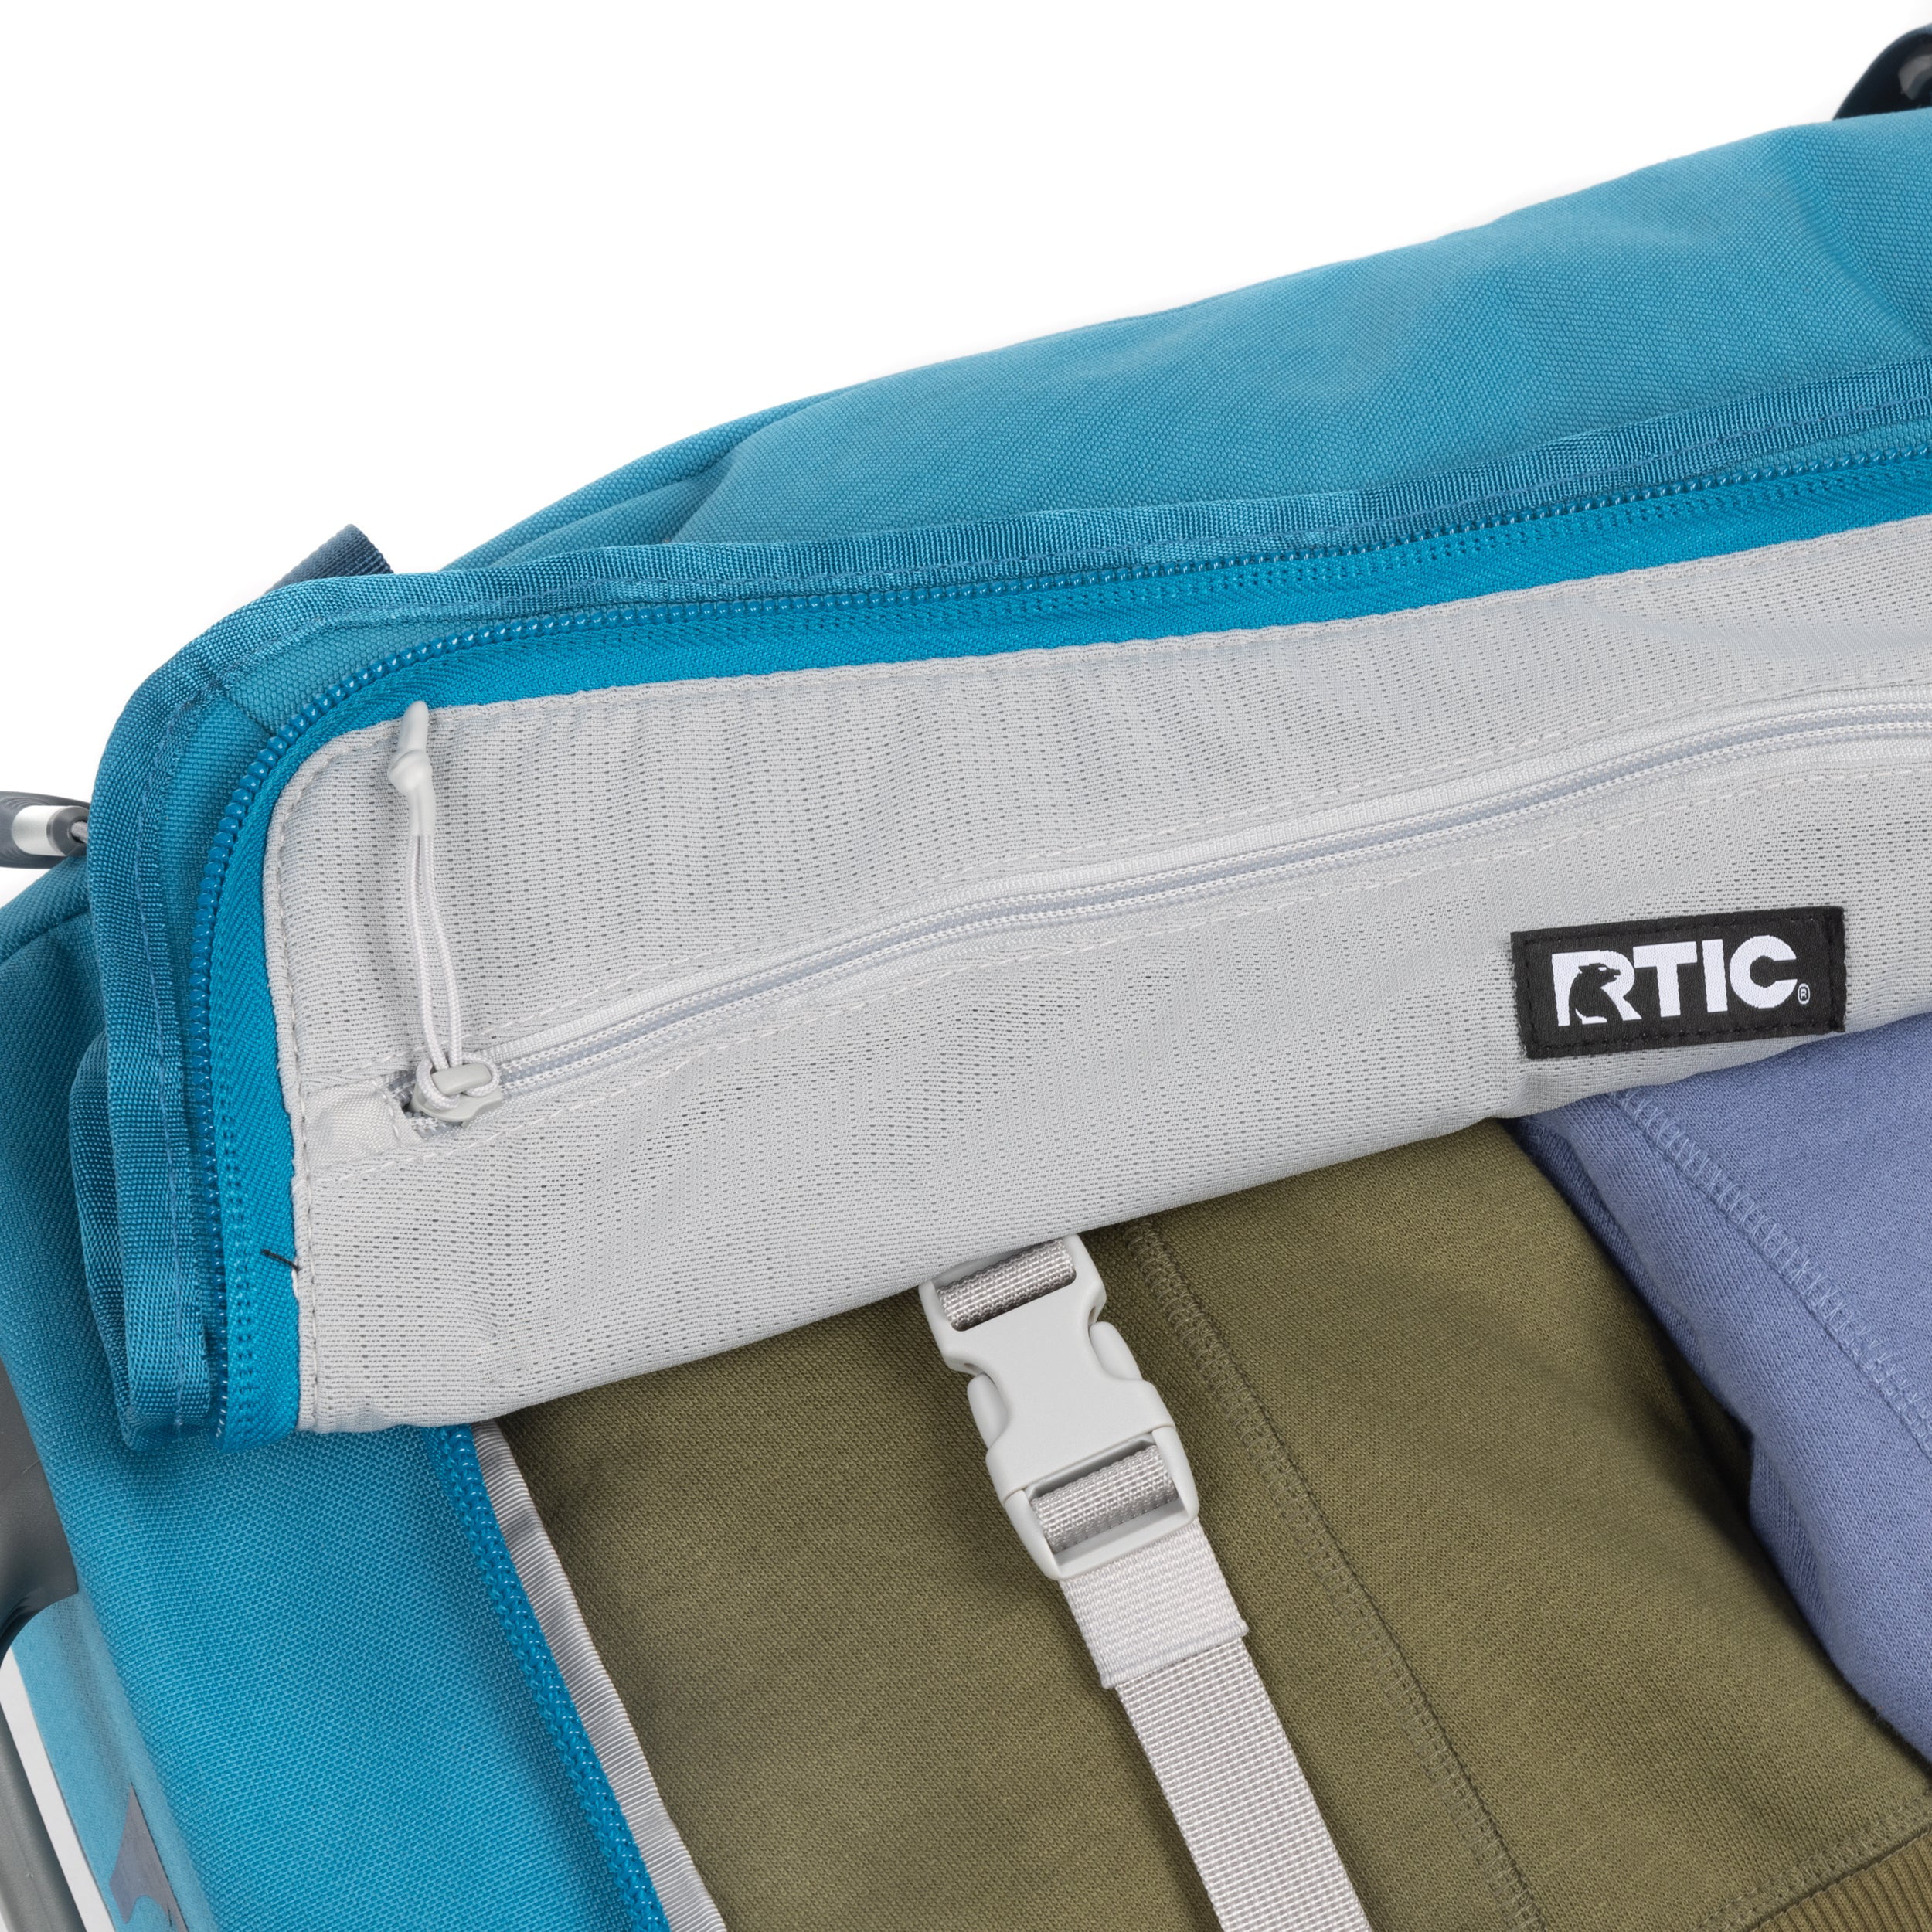 RTIC Road Trip Rolling Duffle Bag with Wheels for Men and Women, Traveling Tote for Camp, Travel, Gym, Weekender, Camping, Overnight Carry On